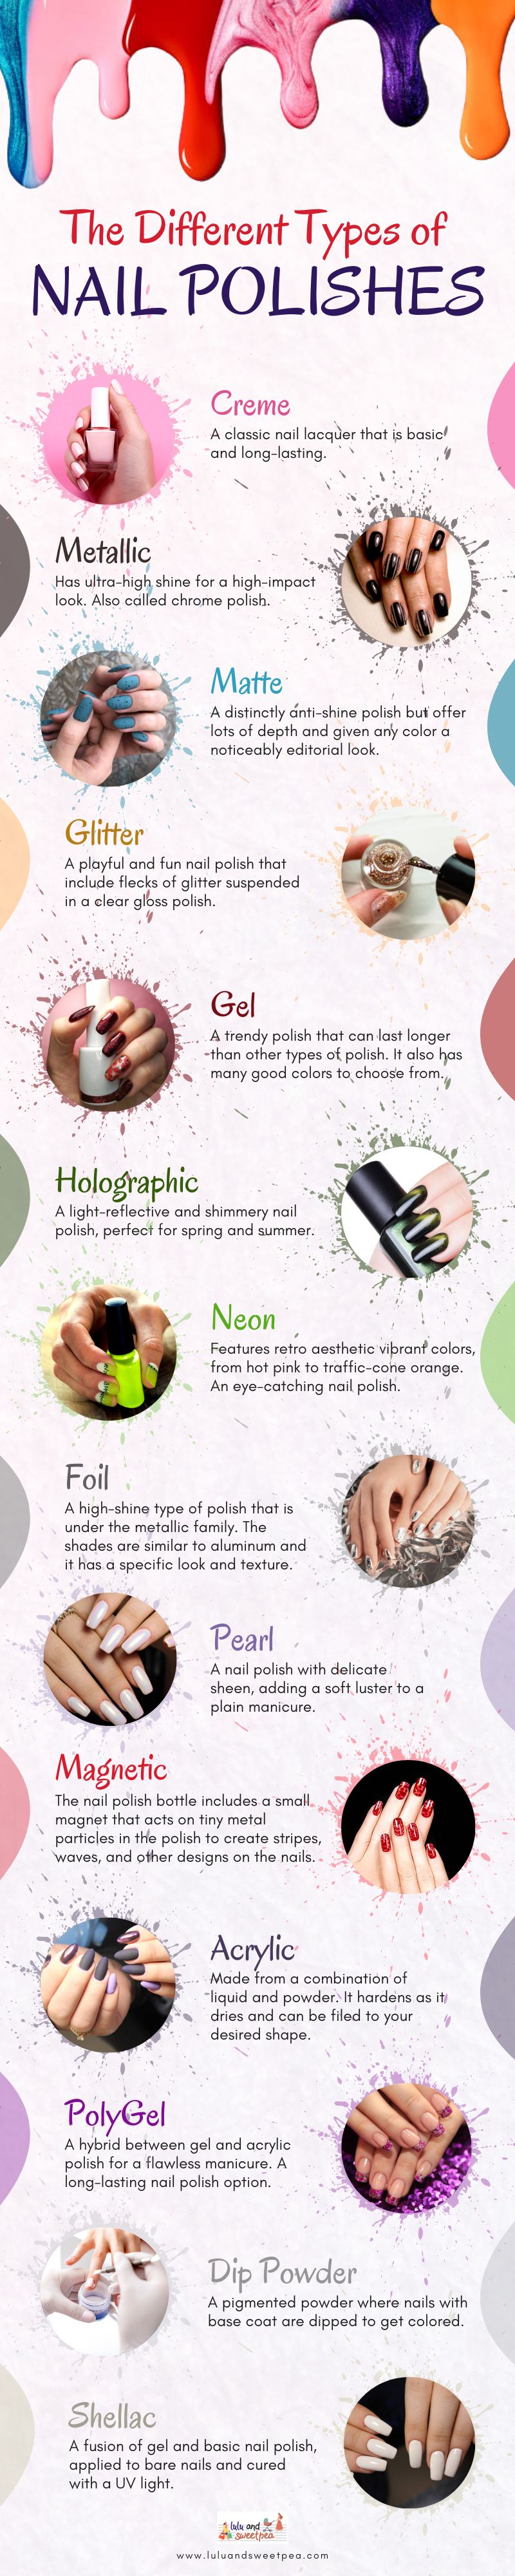 The Different Types of Nail Polishes